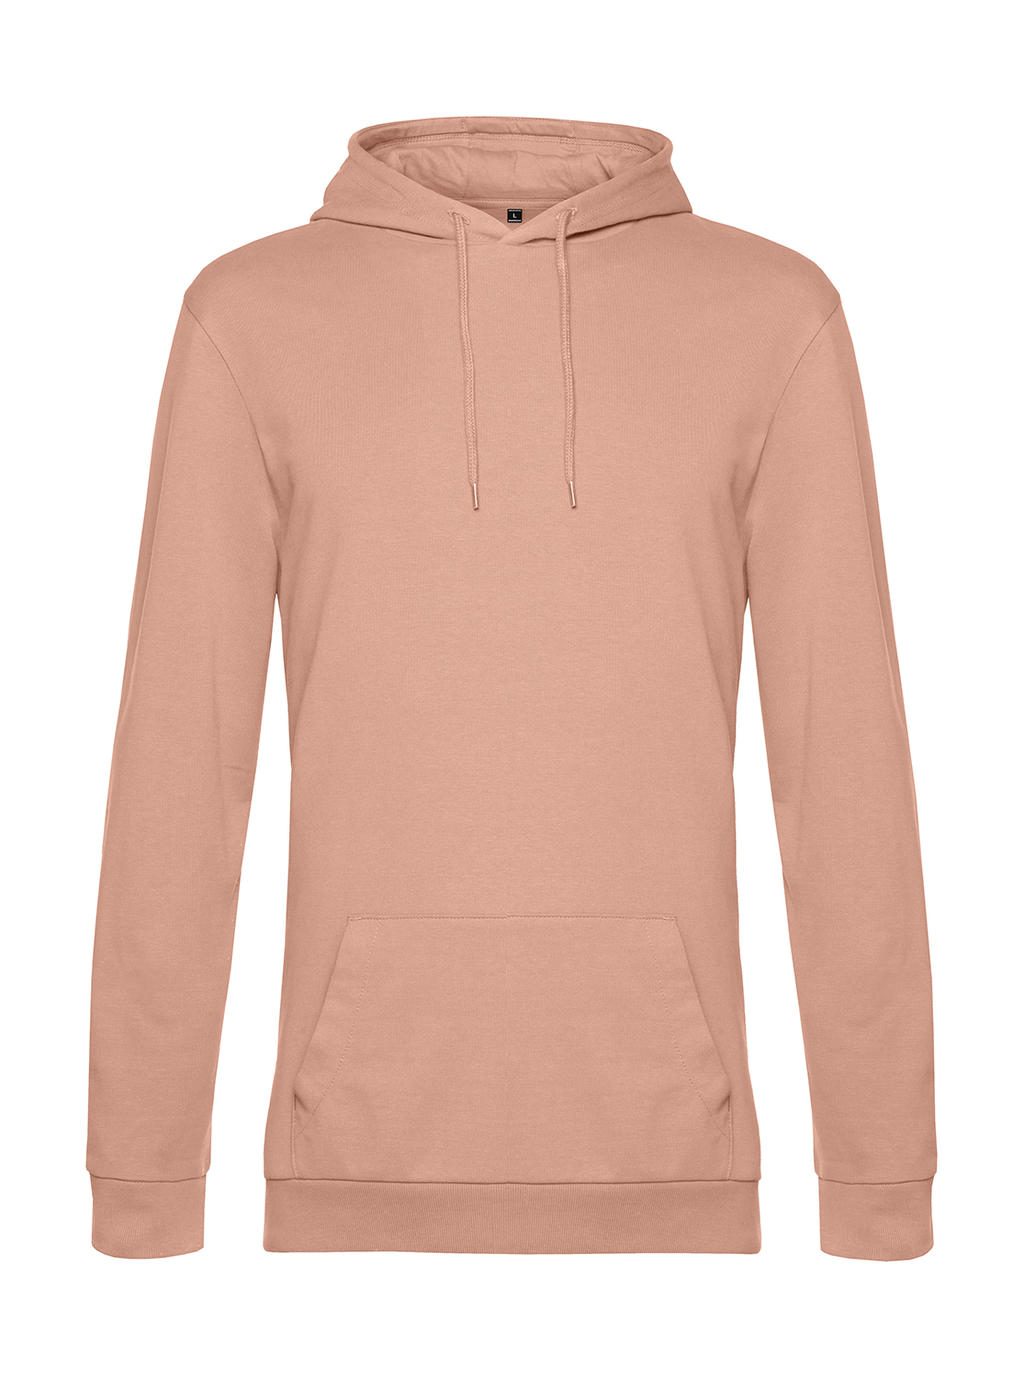 Mikina s kapucňou #Hoodie French Terry - nude